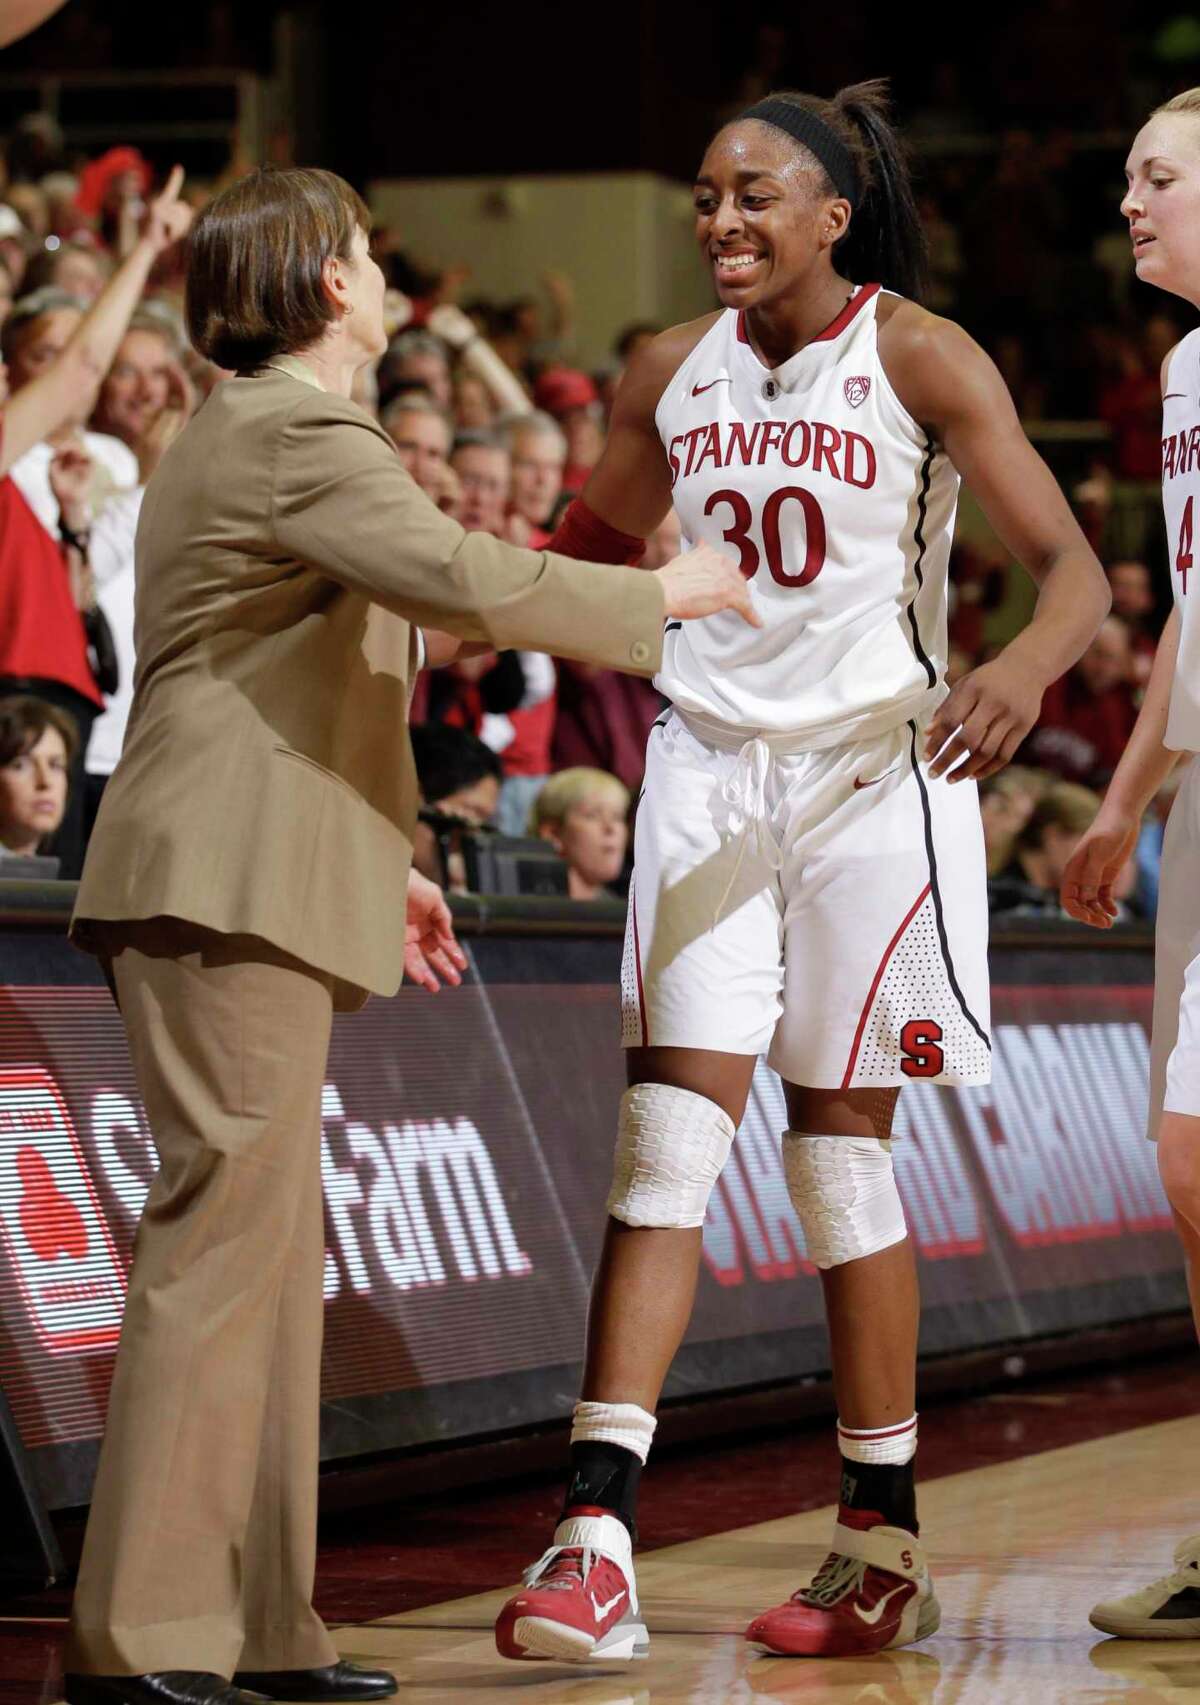 Stanford's Nneka Ogwumike eager to get to work after becoming